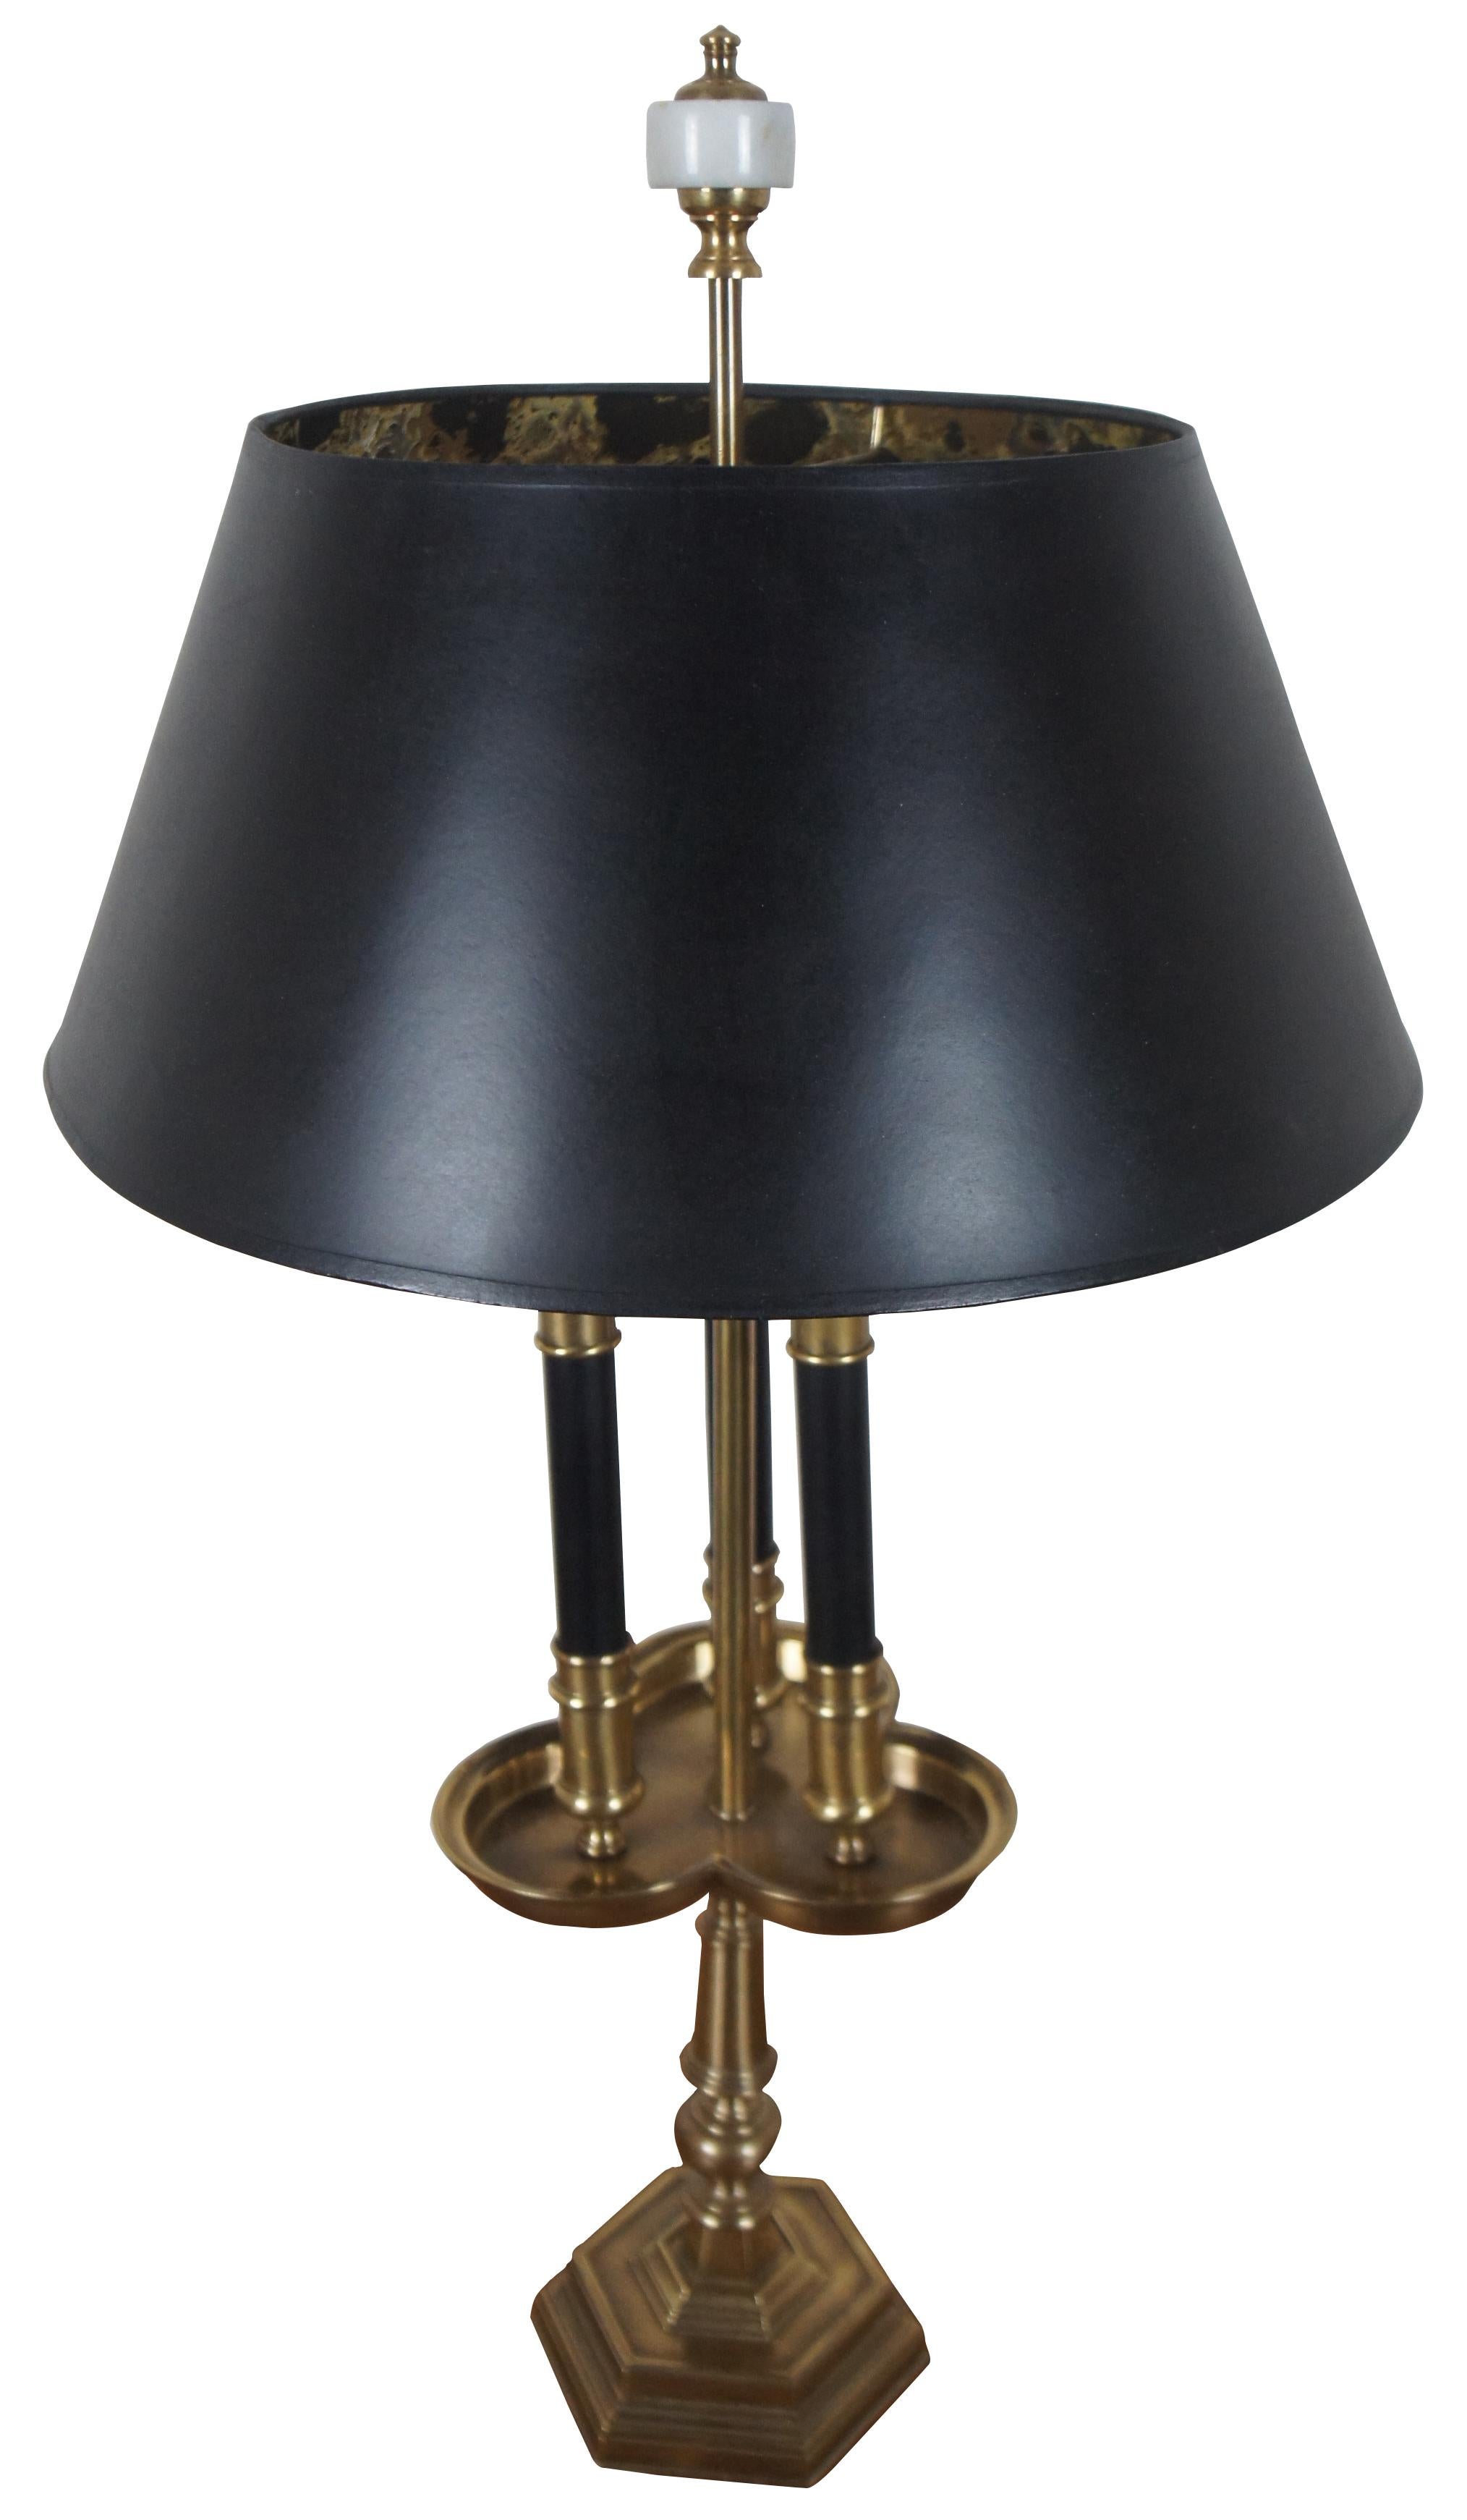 1987 Tall Frederick Cooper two light French bouillotte table lamp in brass with black accents and marble tipped finial.

Measures: 7” x 30” / Shade - 16.25” x 7” (Diameter x Height).